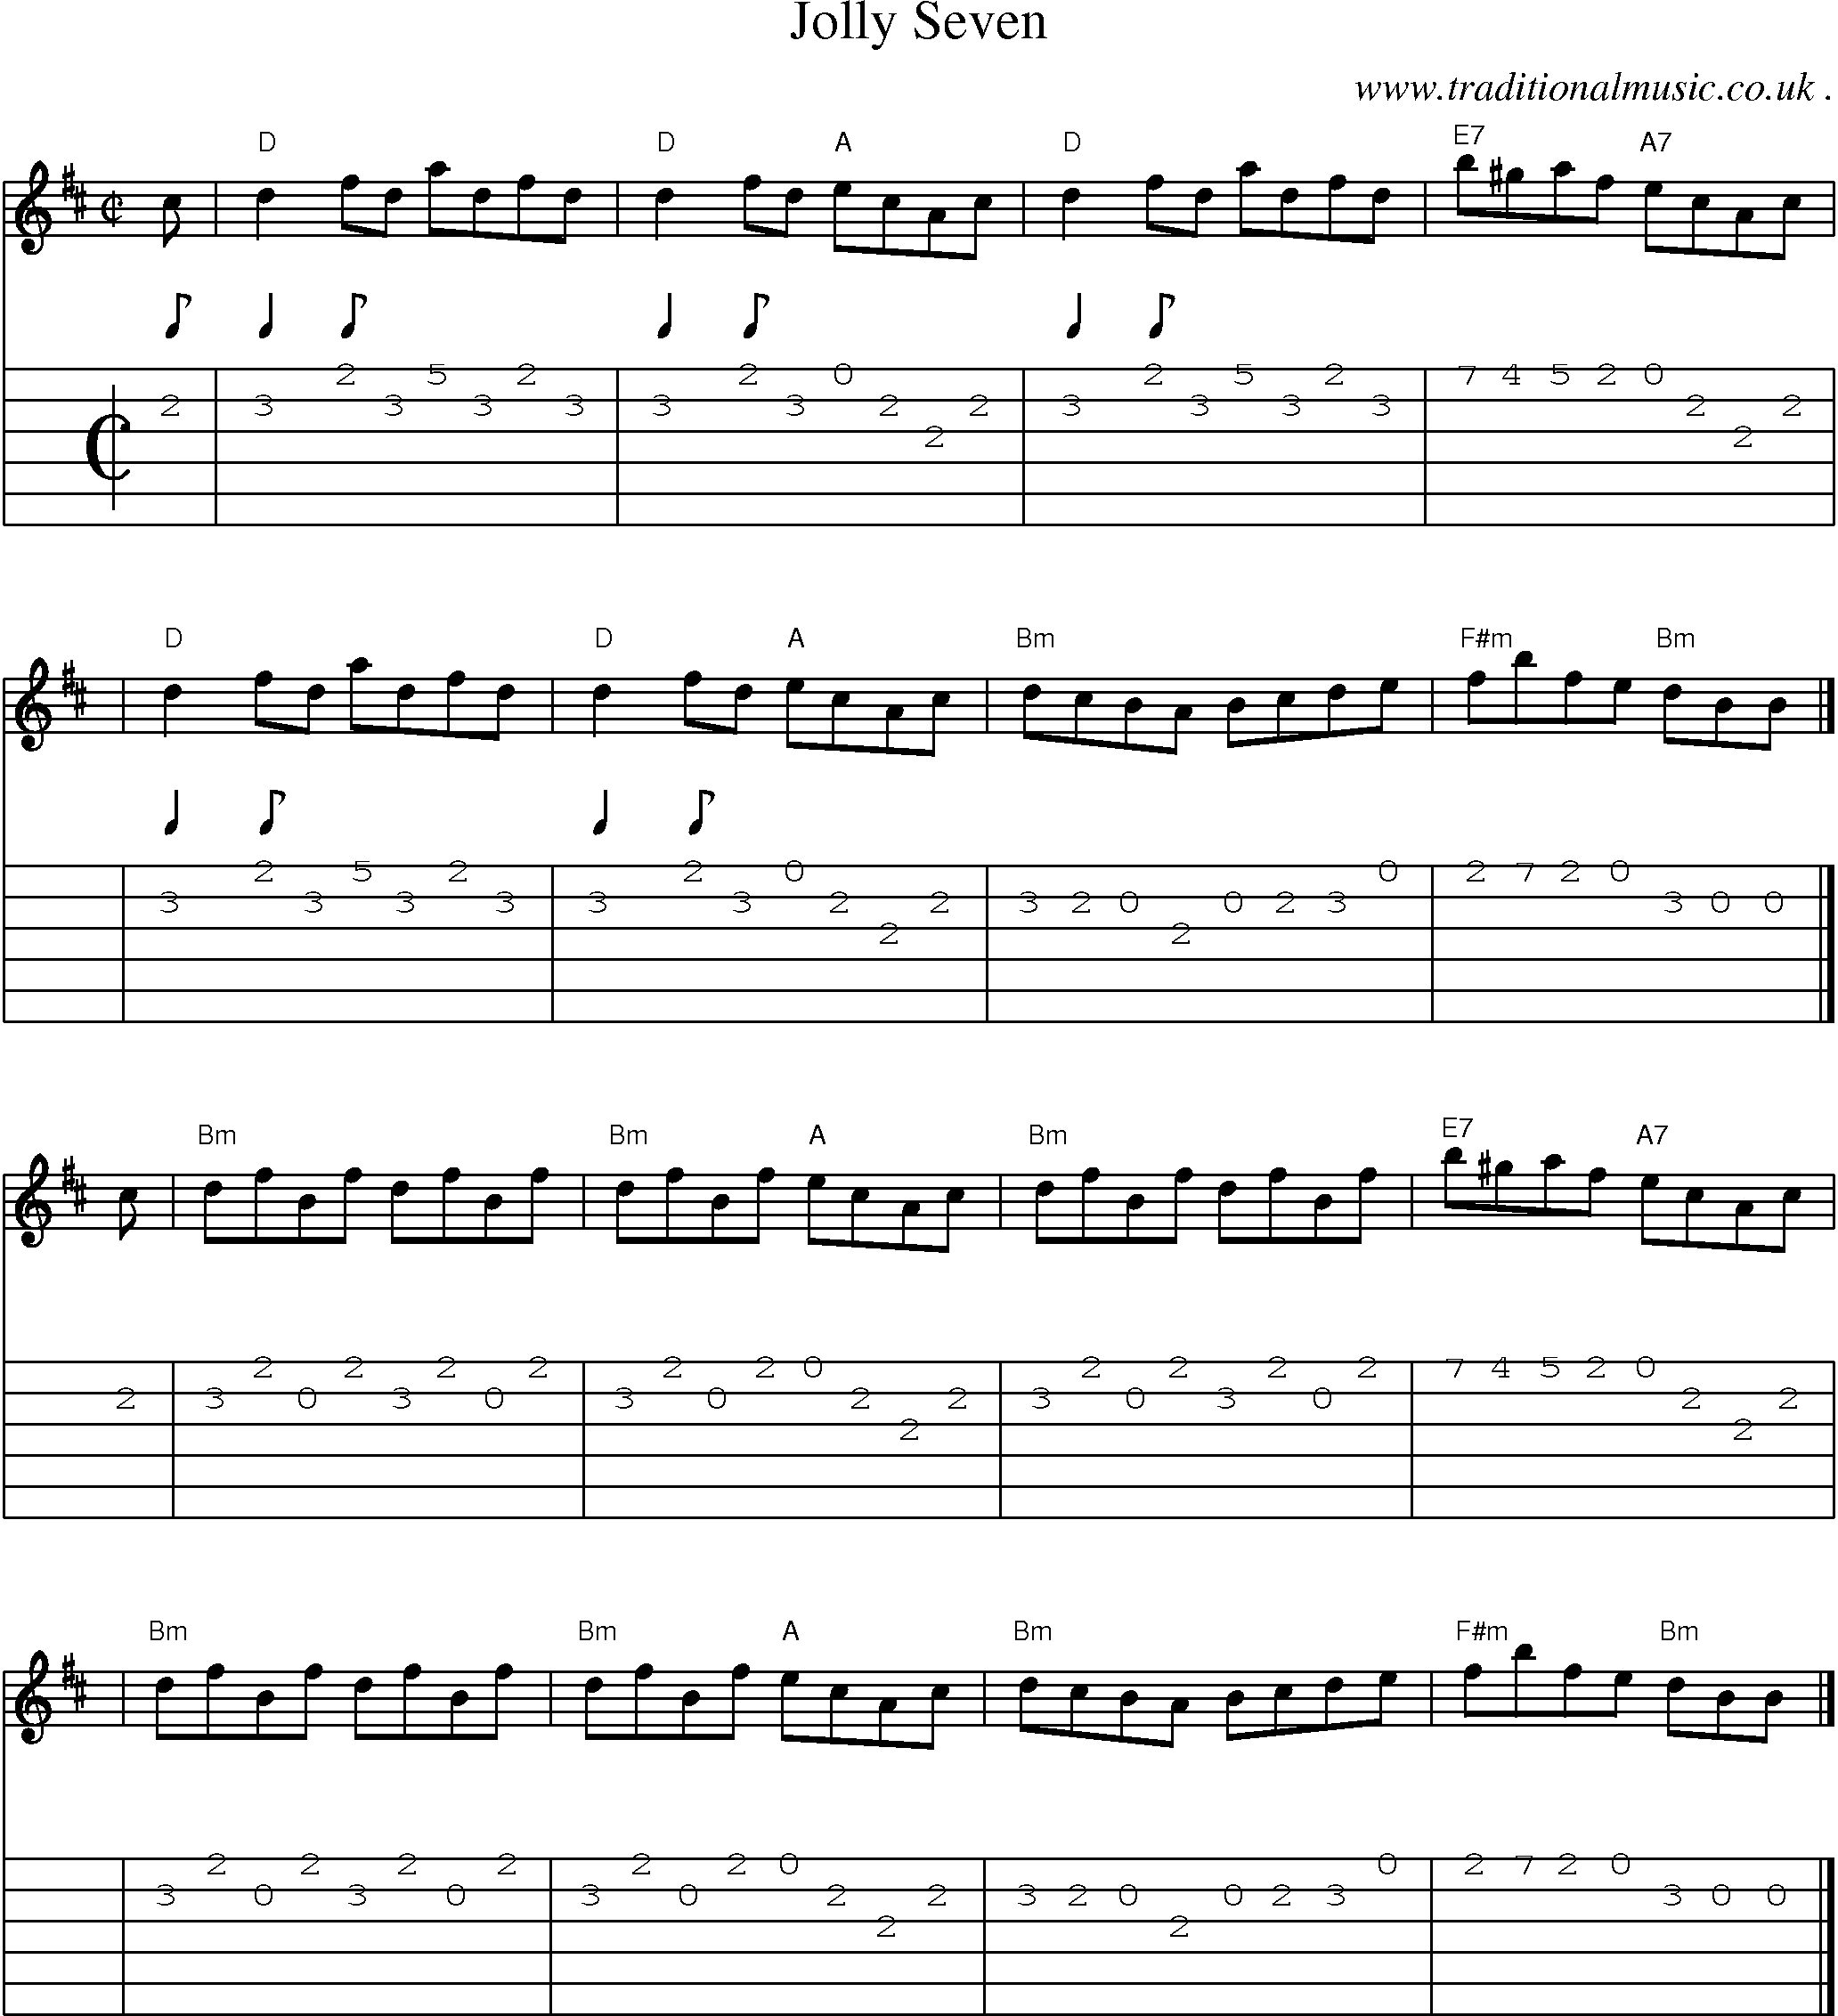 Sheet-music  score, Chords and Guitar Tabs for Jolly Seven